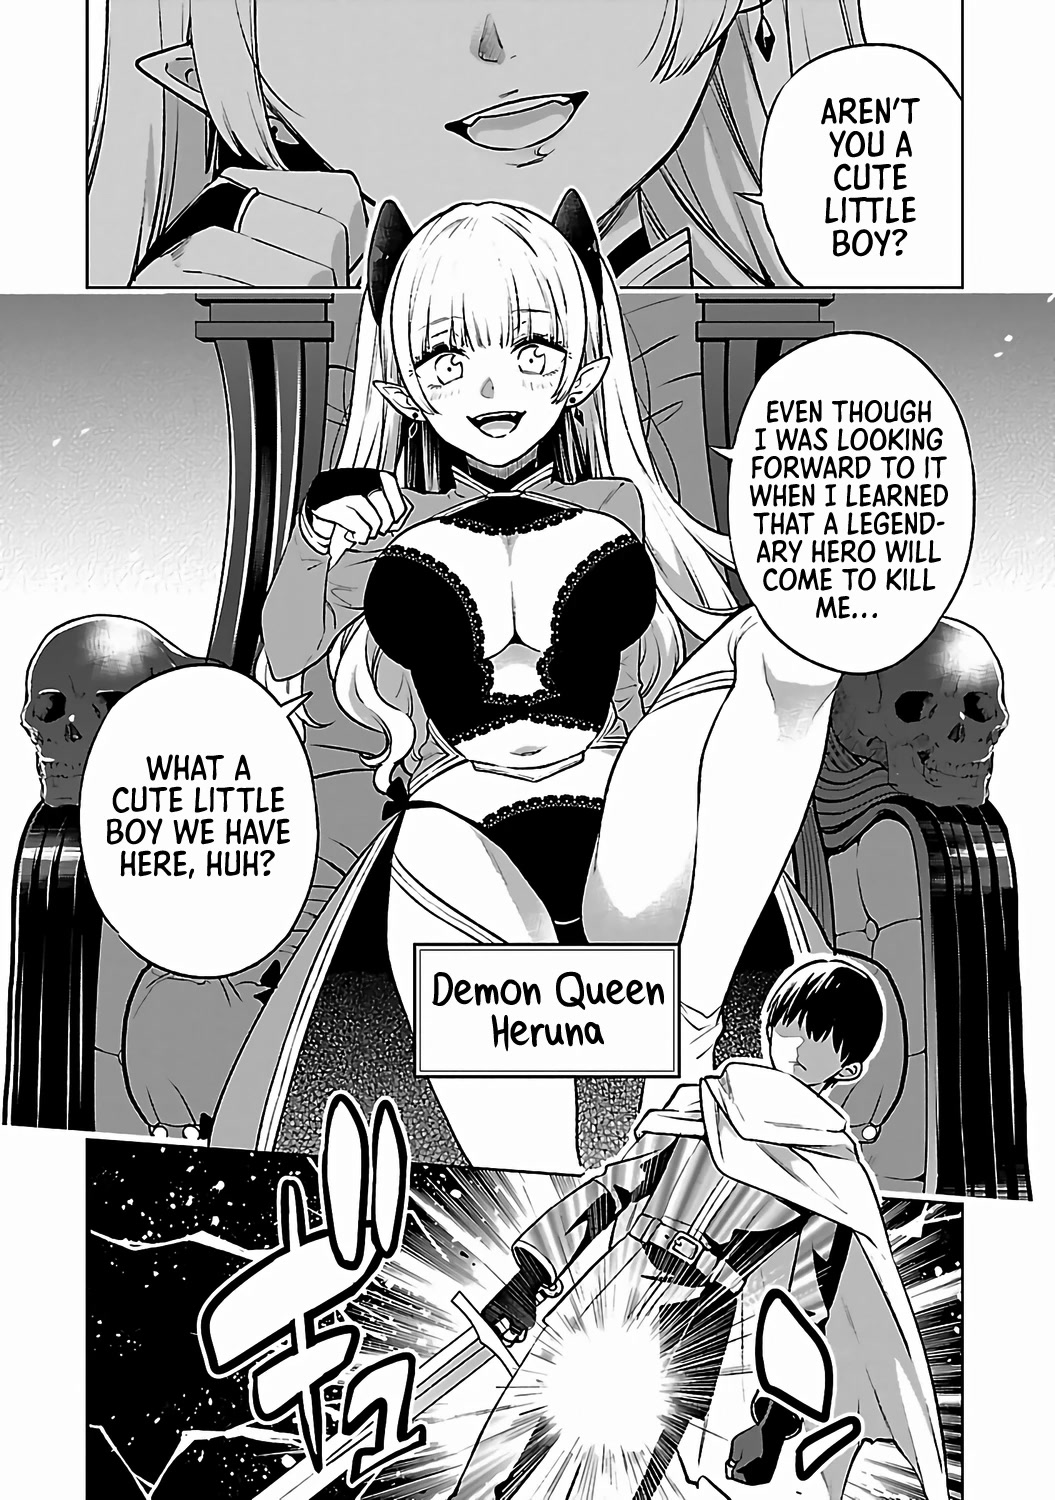 I Can't Take My Eyes Off Boobs Even In Another World! - Page 3